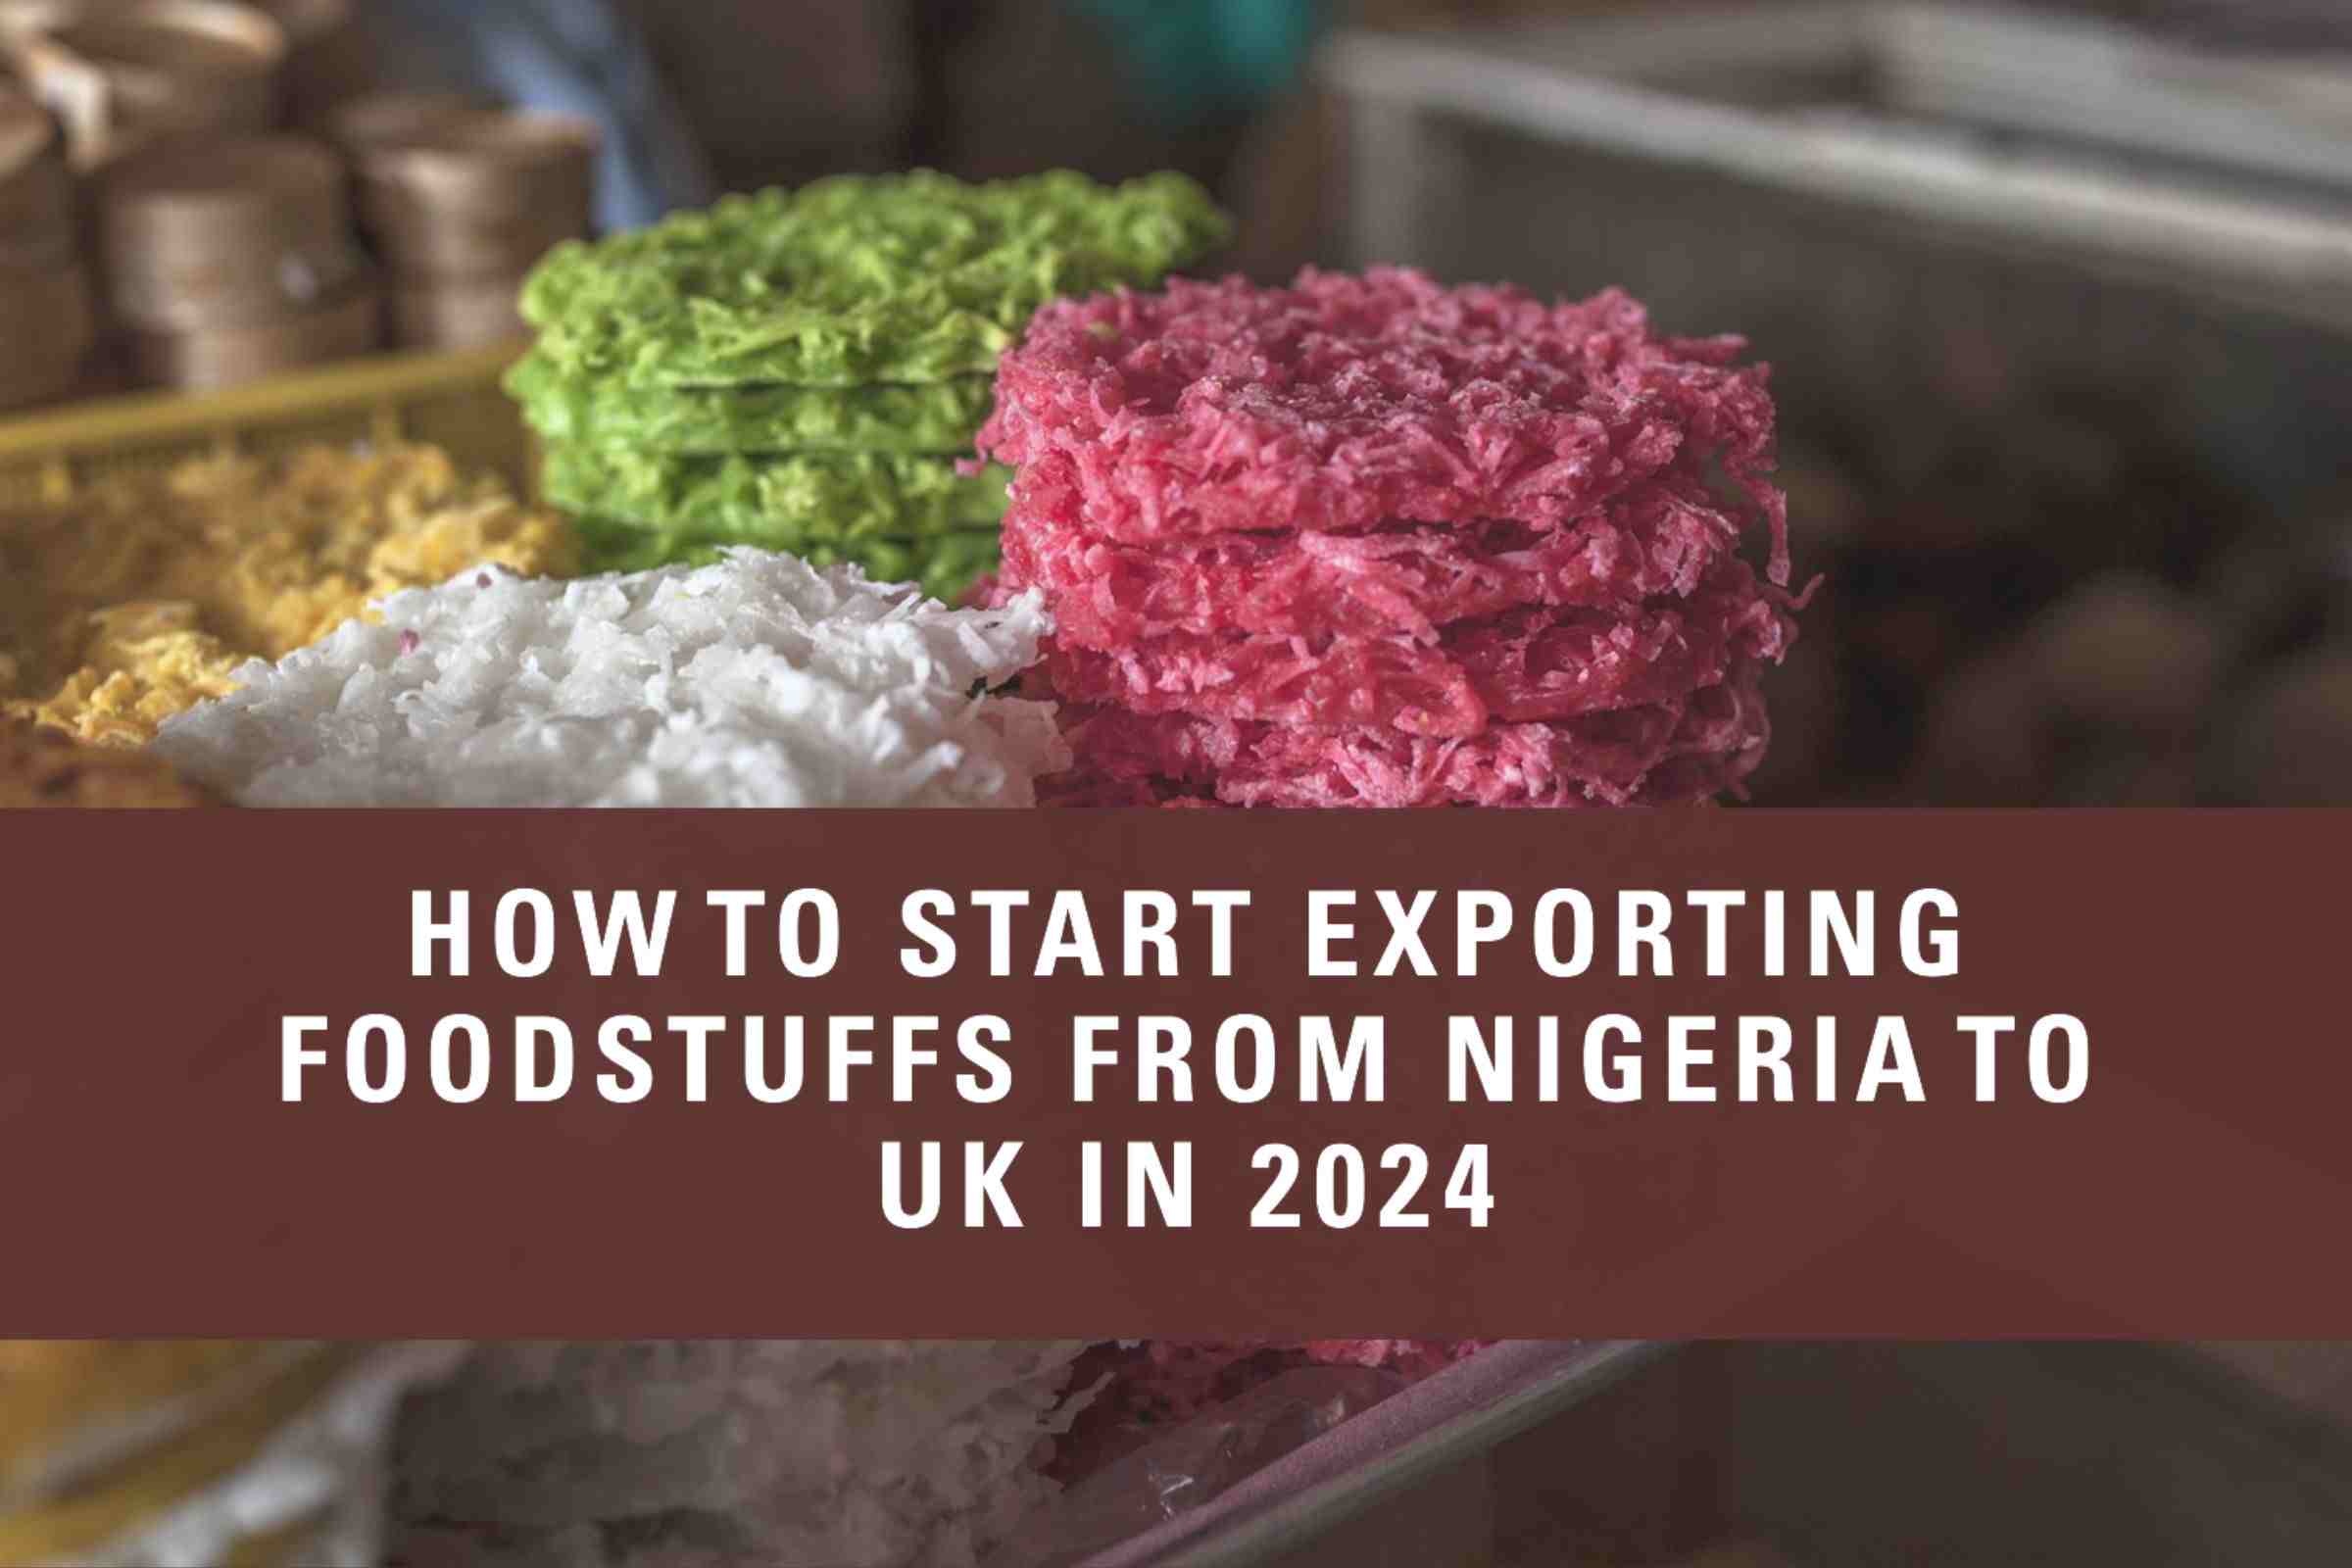 How to Start Exporting Foodstuffs From Nigeria to UK in 2024